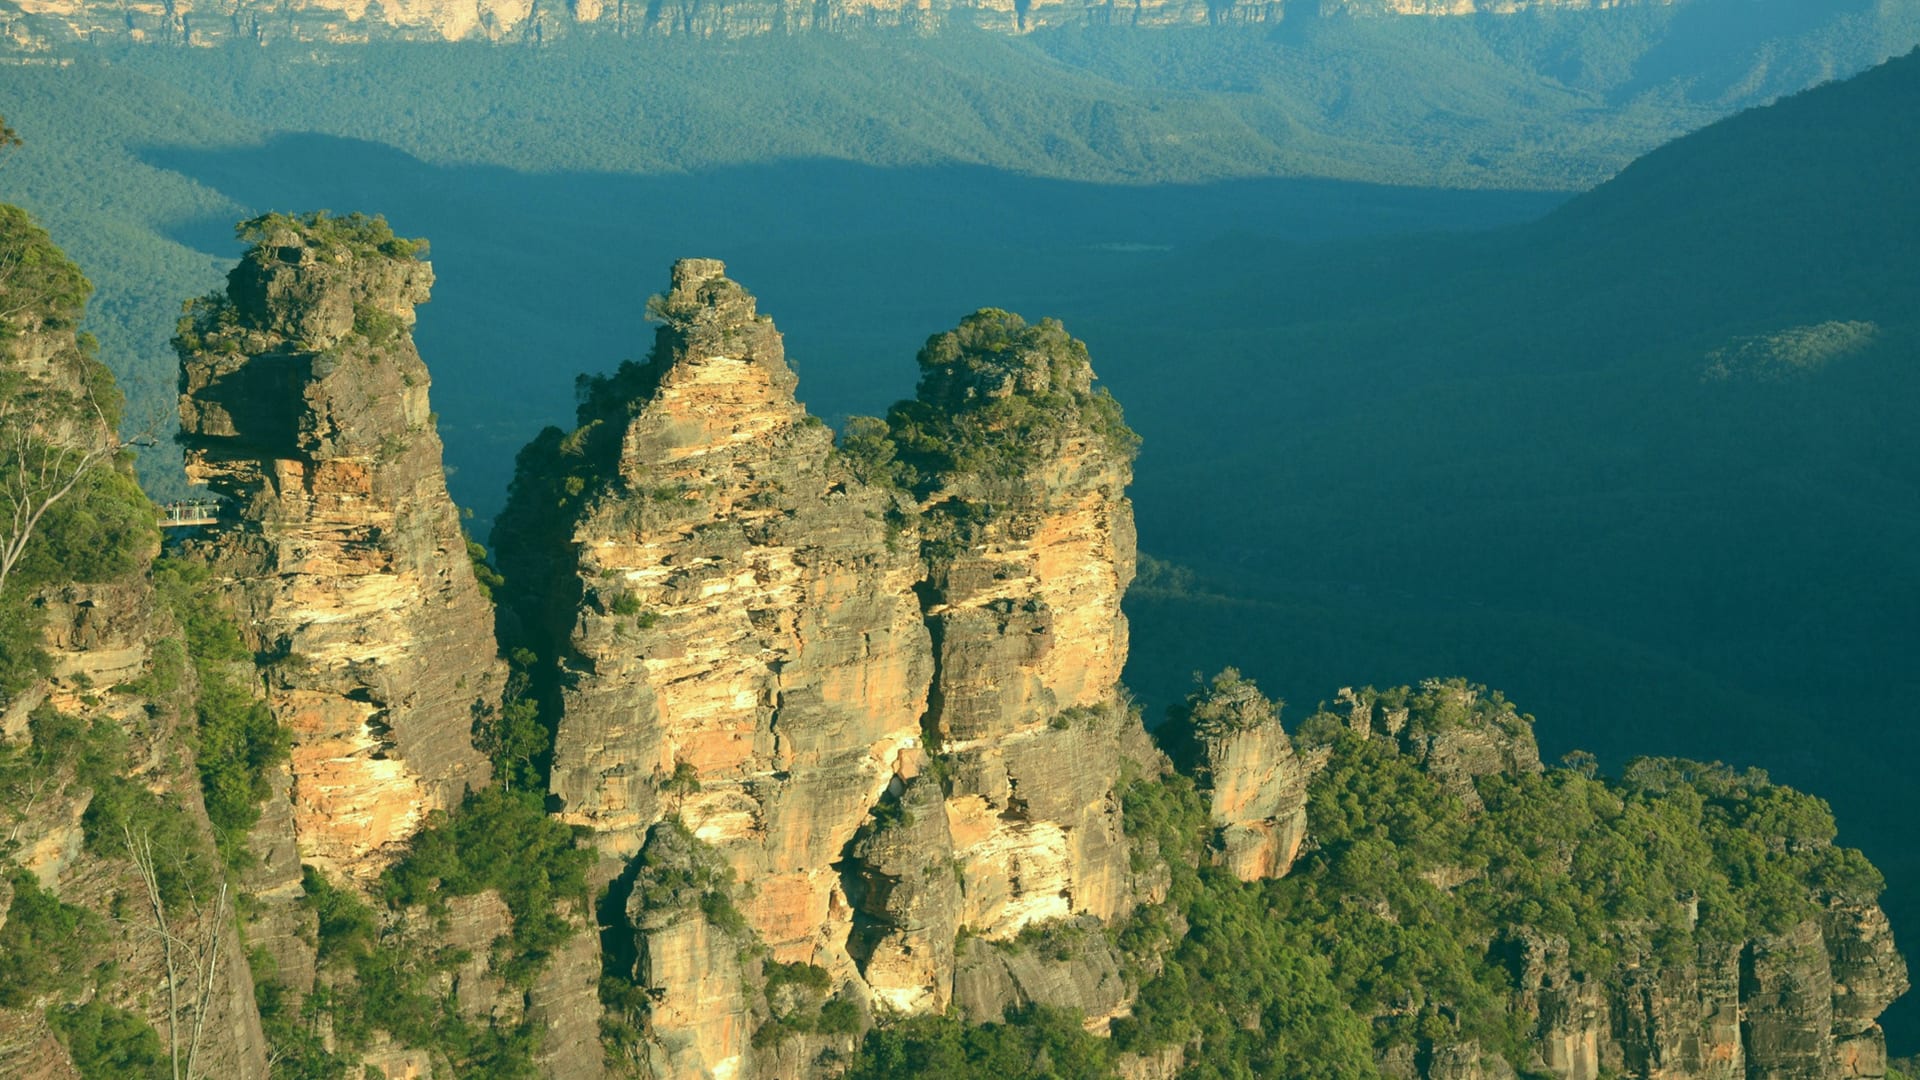 Visit Australia for: Blue mountains from the sky